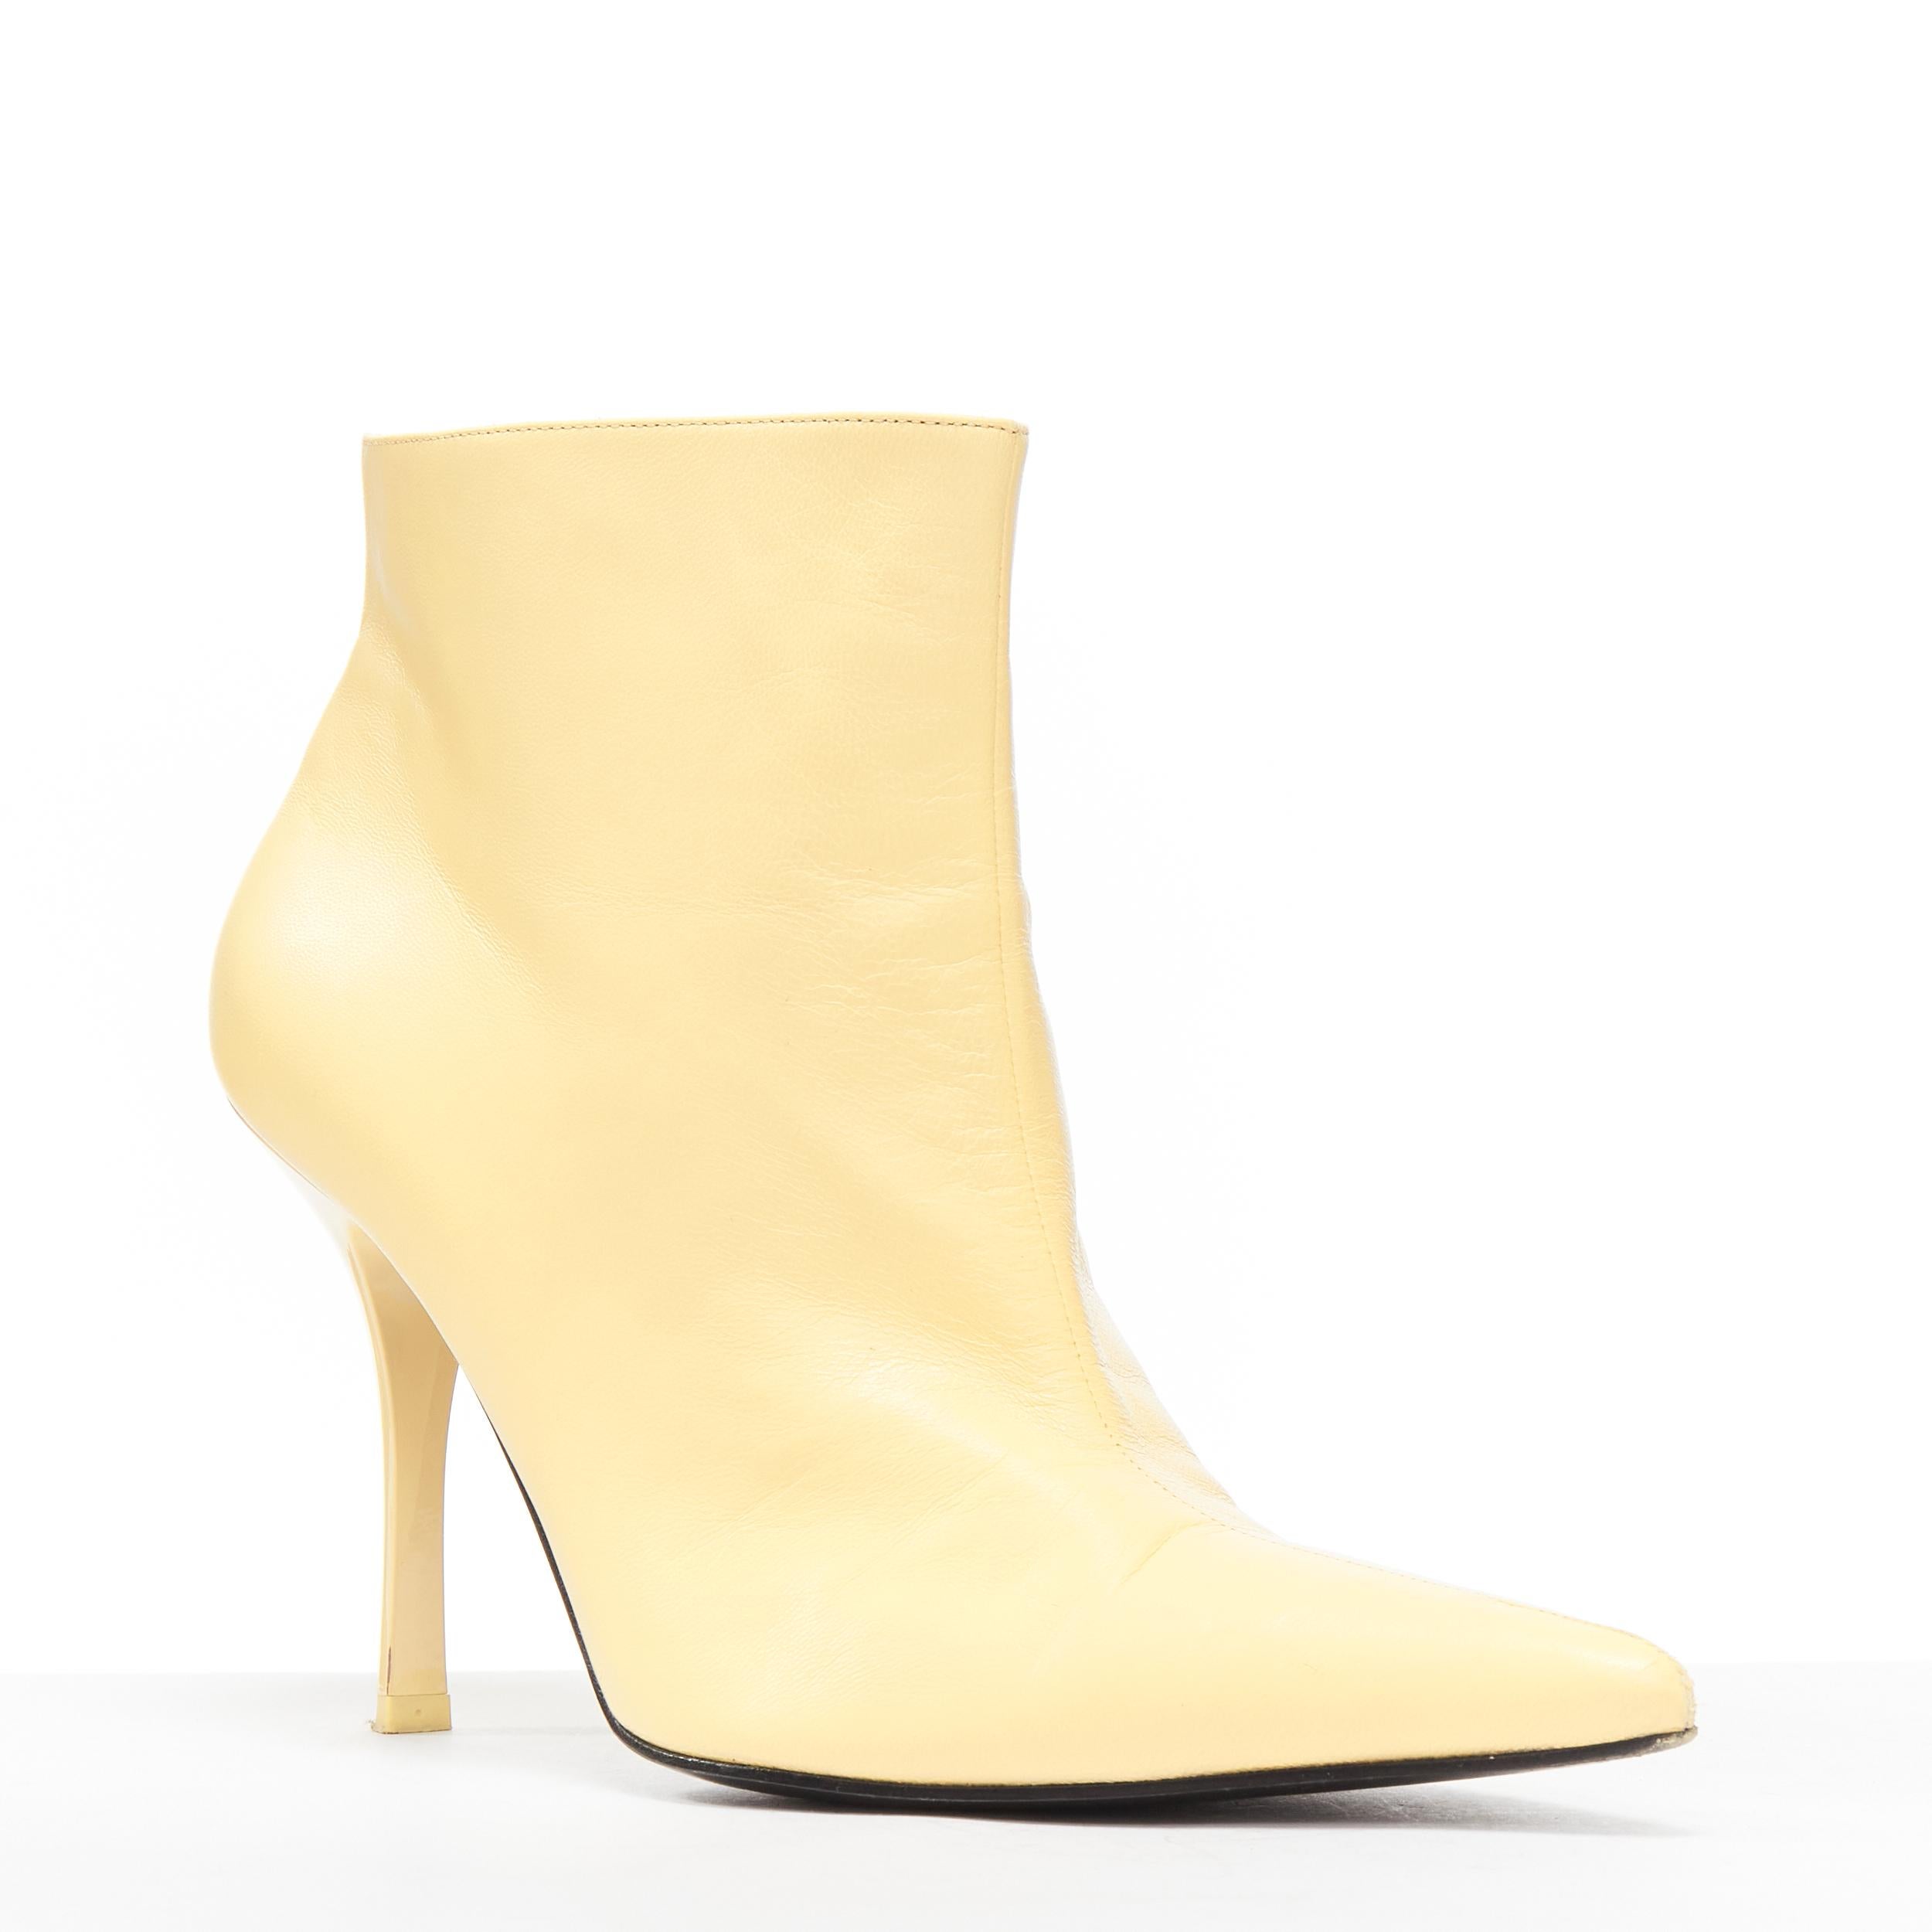 OLD CELINE Phoebe Philo nude leather pointed toe high heel ankle boots EU38
Reference: LNKO/A02137
Brand: Celine
Designer: Phoebe Philo
Material: Leather
Color: Nude
Pattern: Solid
Closure: Slip On
Lining: Black Leather
Made in: